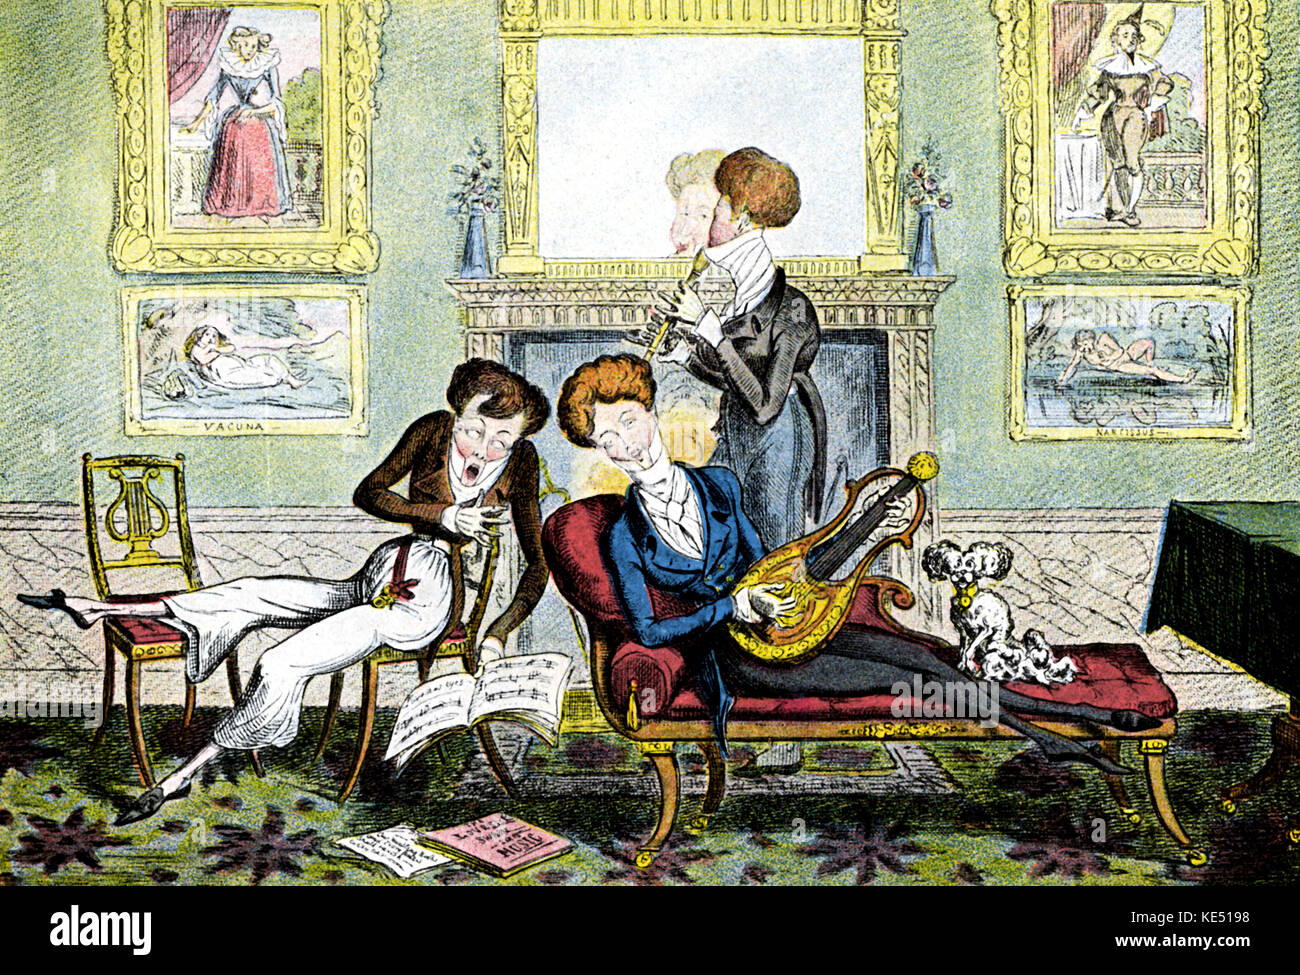 'Hummingbirds' (or 'The Dandy Trio') - English caricature by George Cruikshank, 1819. Three dandies playing musical instruments and singing. GC, English caricaturist: 27 September 1792 - 1 February 1878. Chaise longue. Parlour. Stock Photo